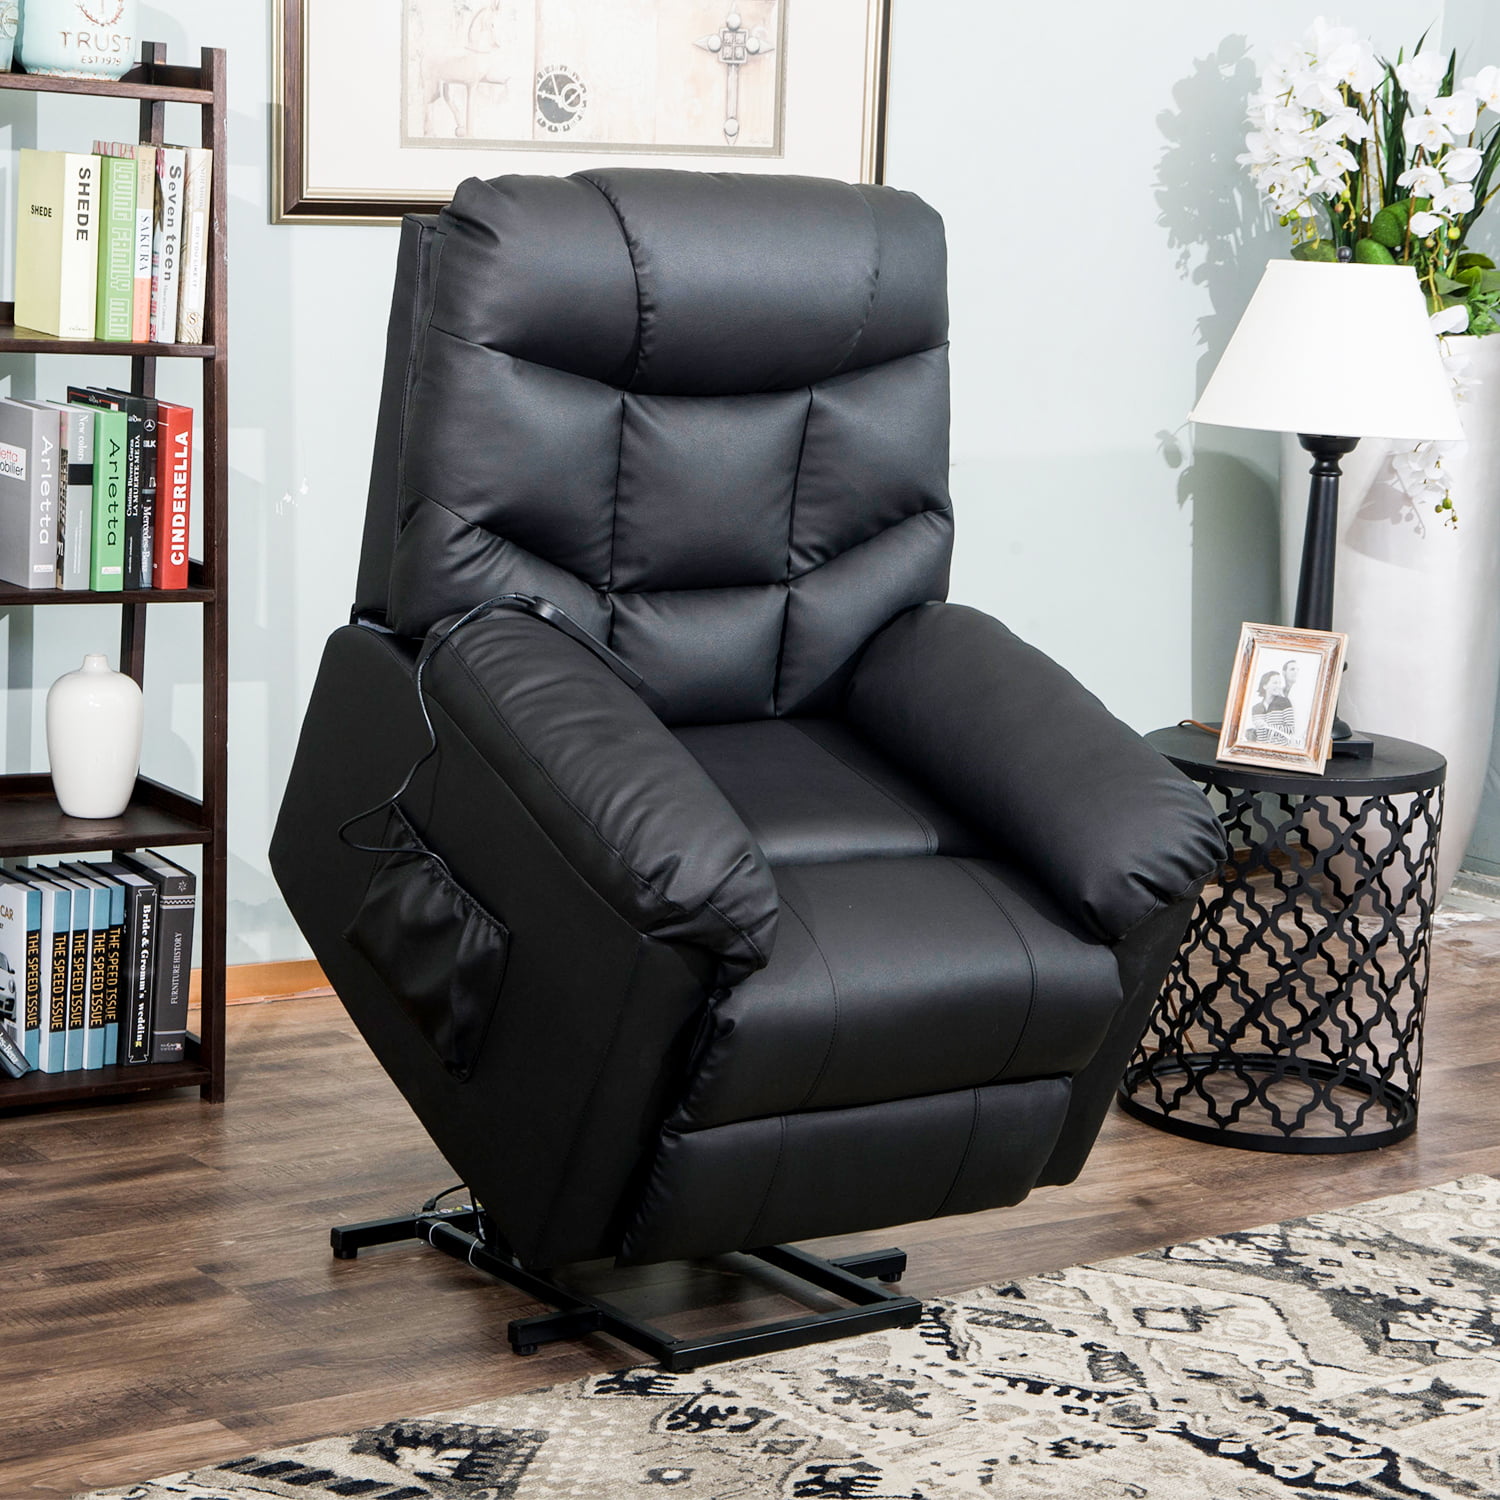 Reclining Chairs For Elderly : 5 of the Best Lift Chairs/Recliners for